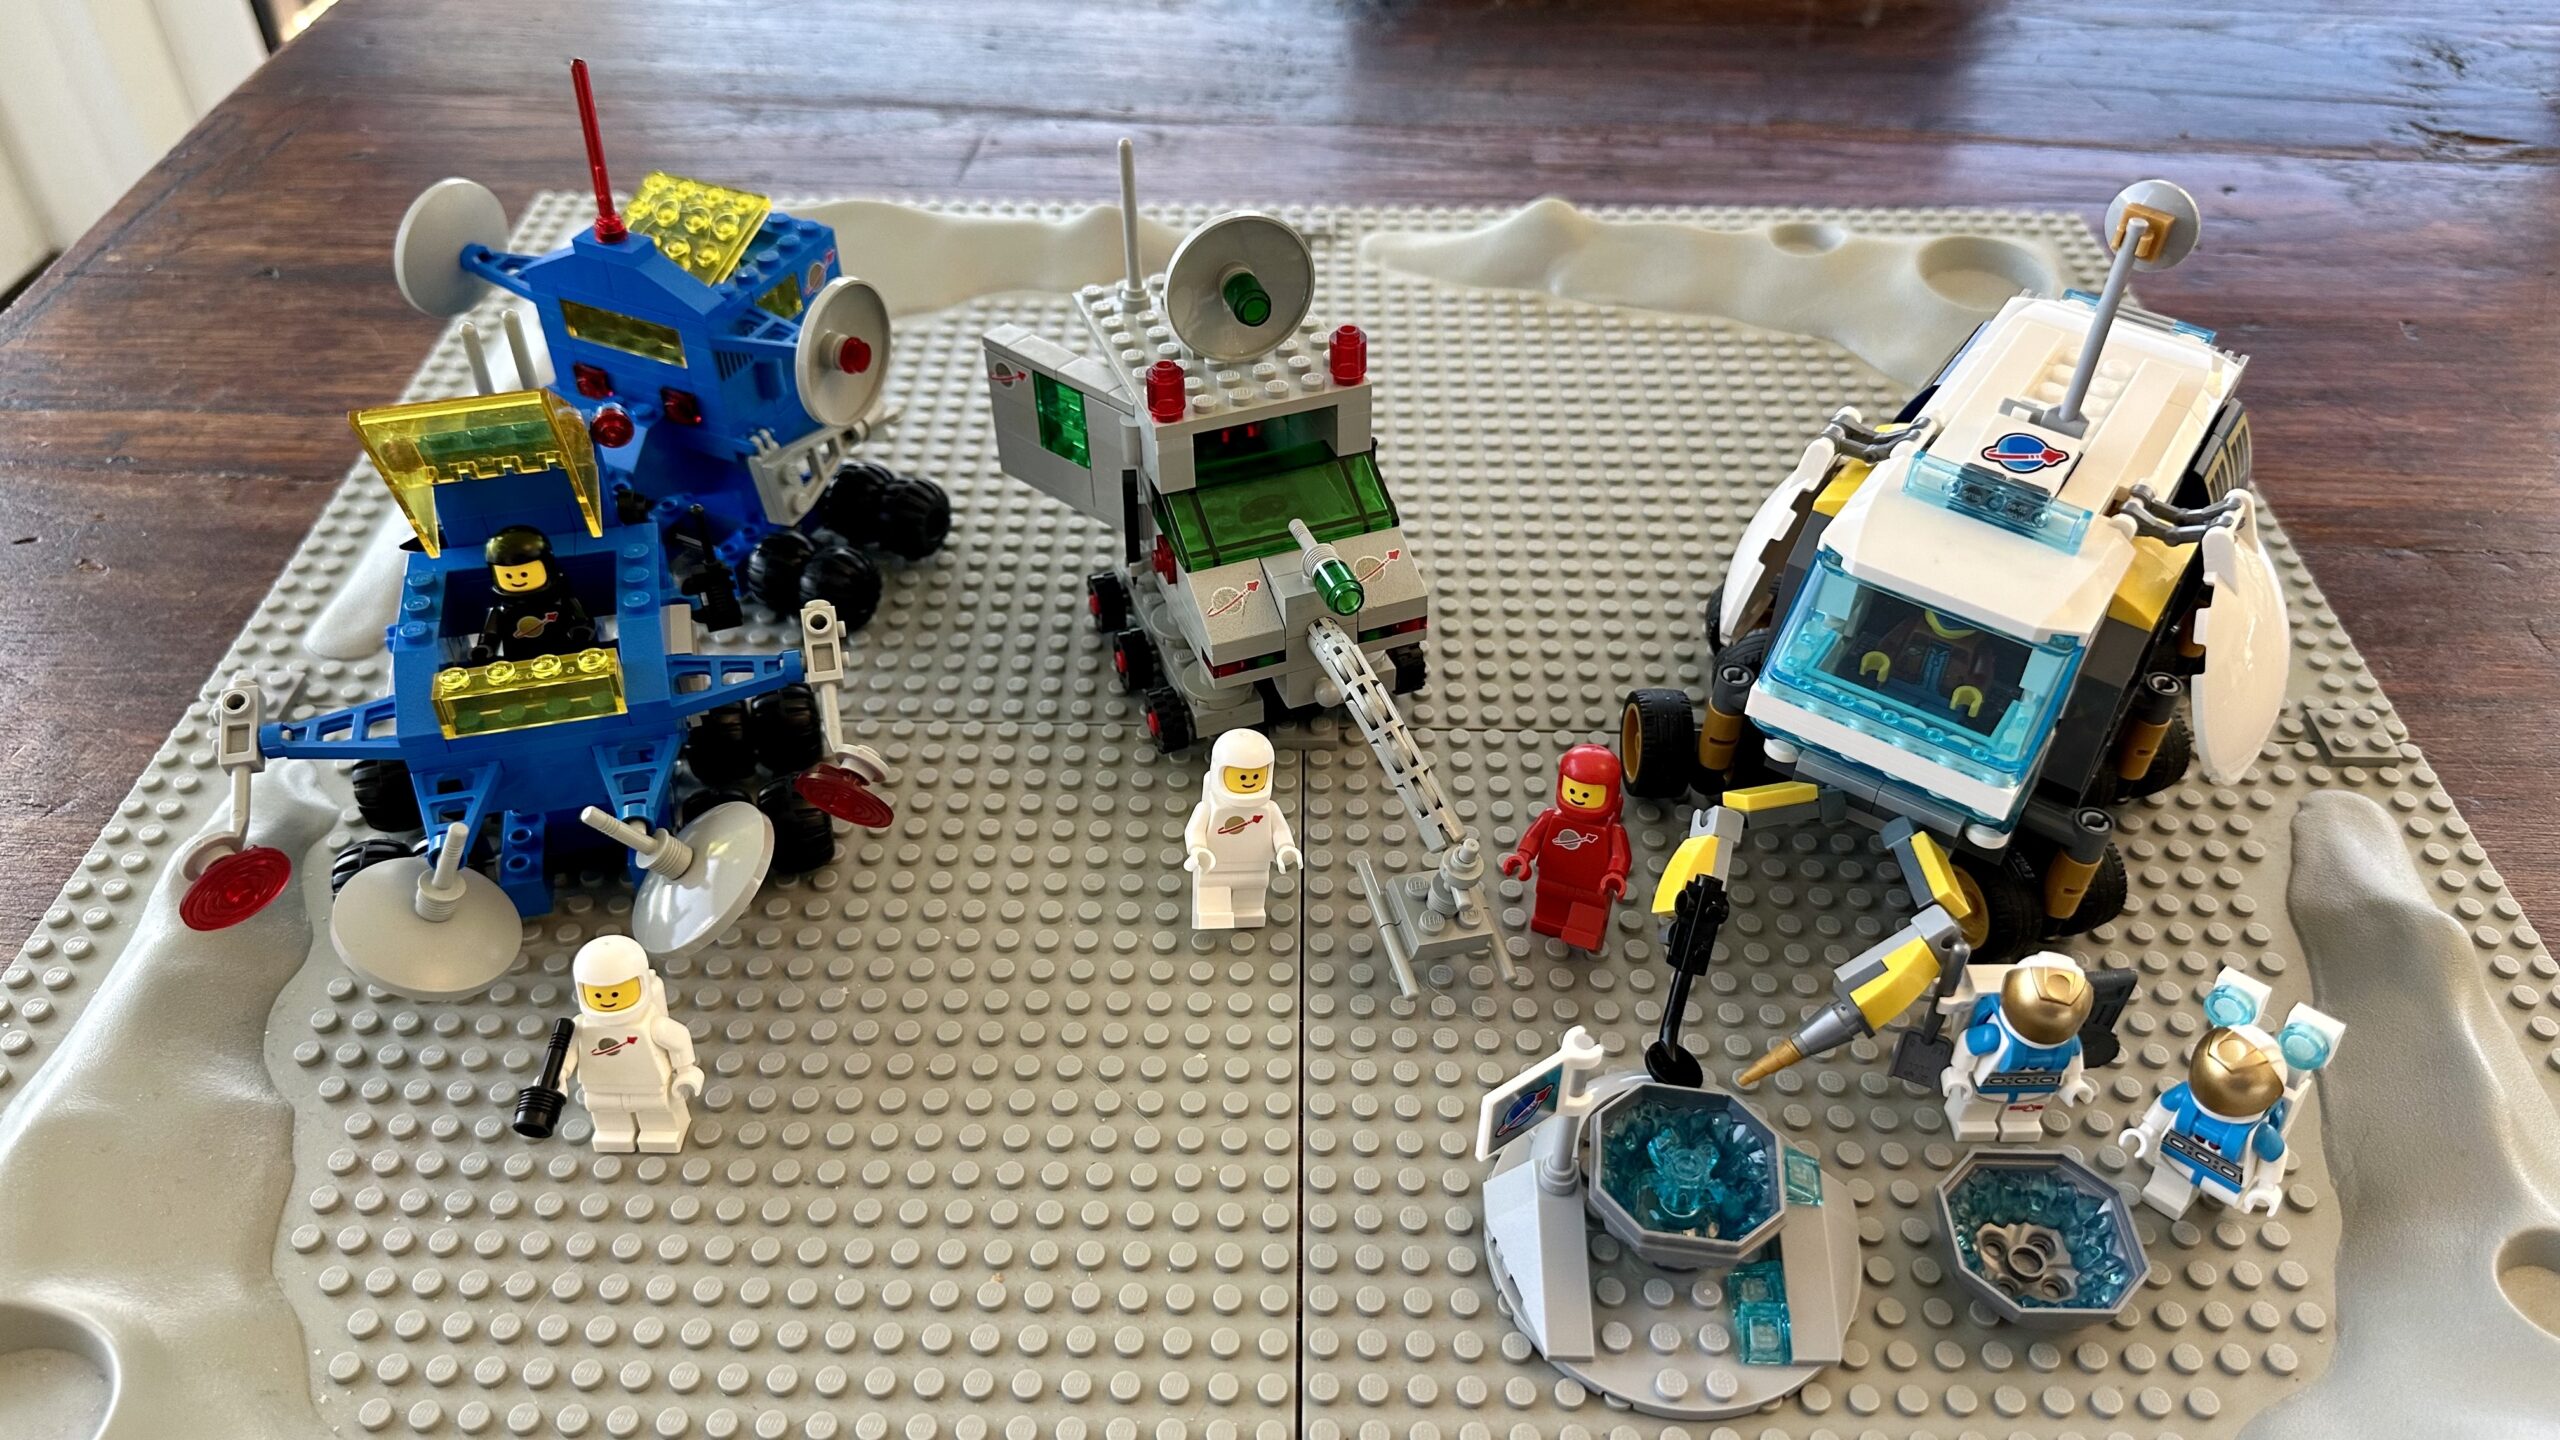 Three LEGO sets of lunar vehicles from 1980, 1984, and 2022.